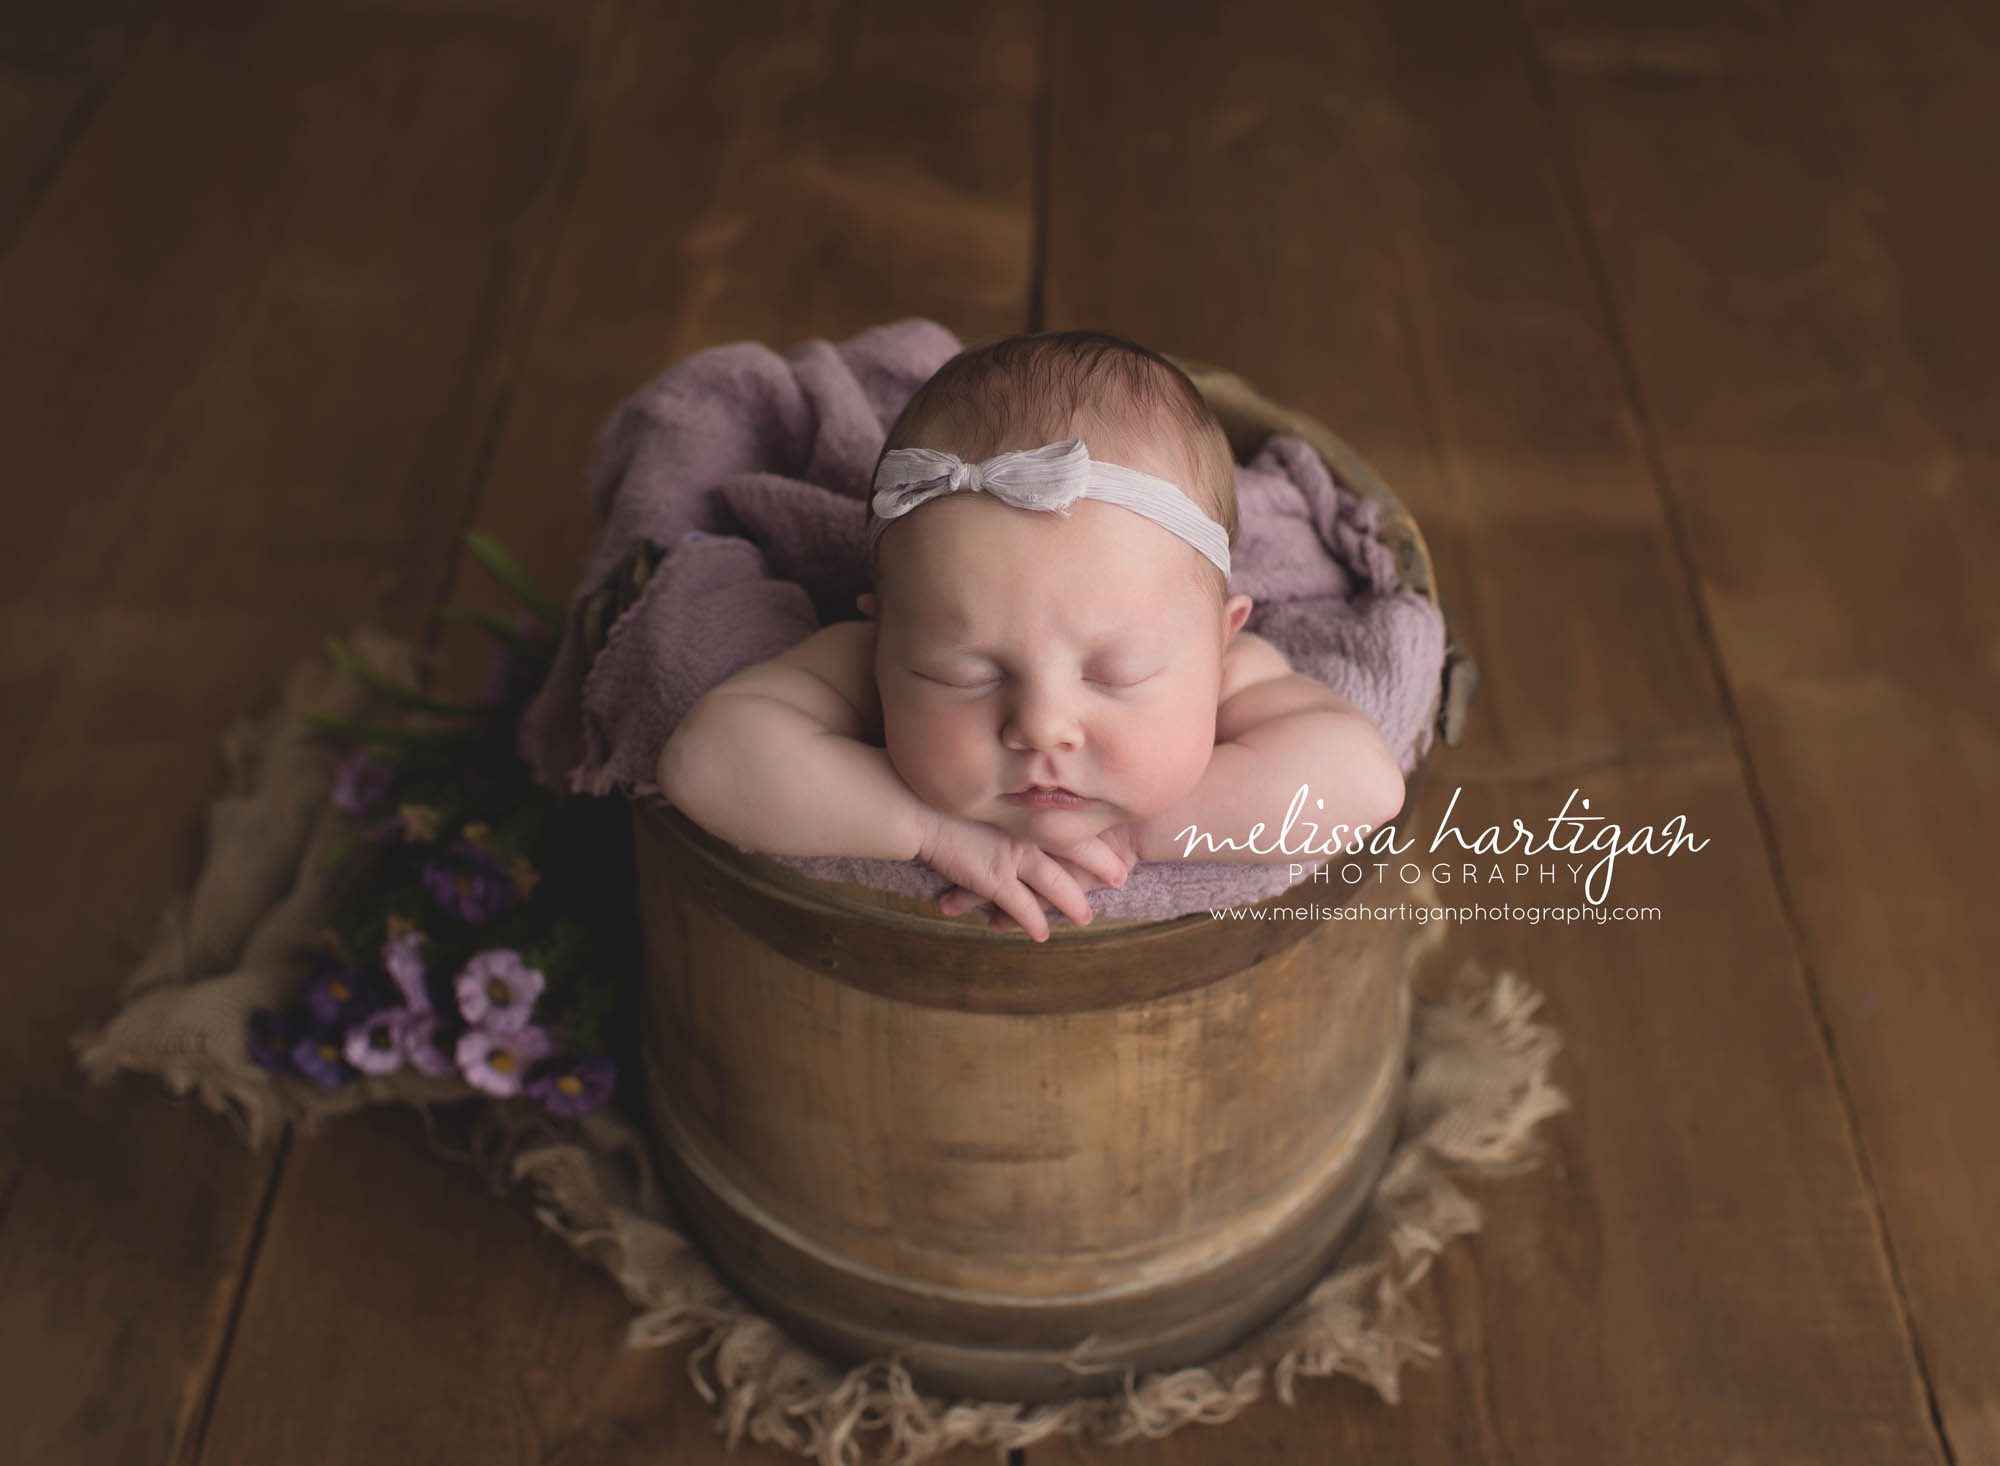 Melissa Hartigan Photography Connecticut Newborn Photographer Coventry Ct Middlefield CT baby Fairfield county Baby girl purple headband and blanket in wooden bucket with purple flowers sleeping CT newborn session